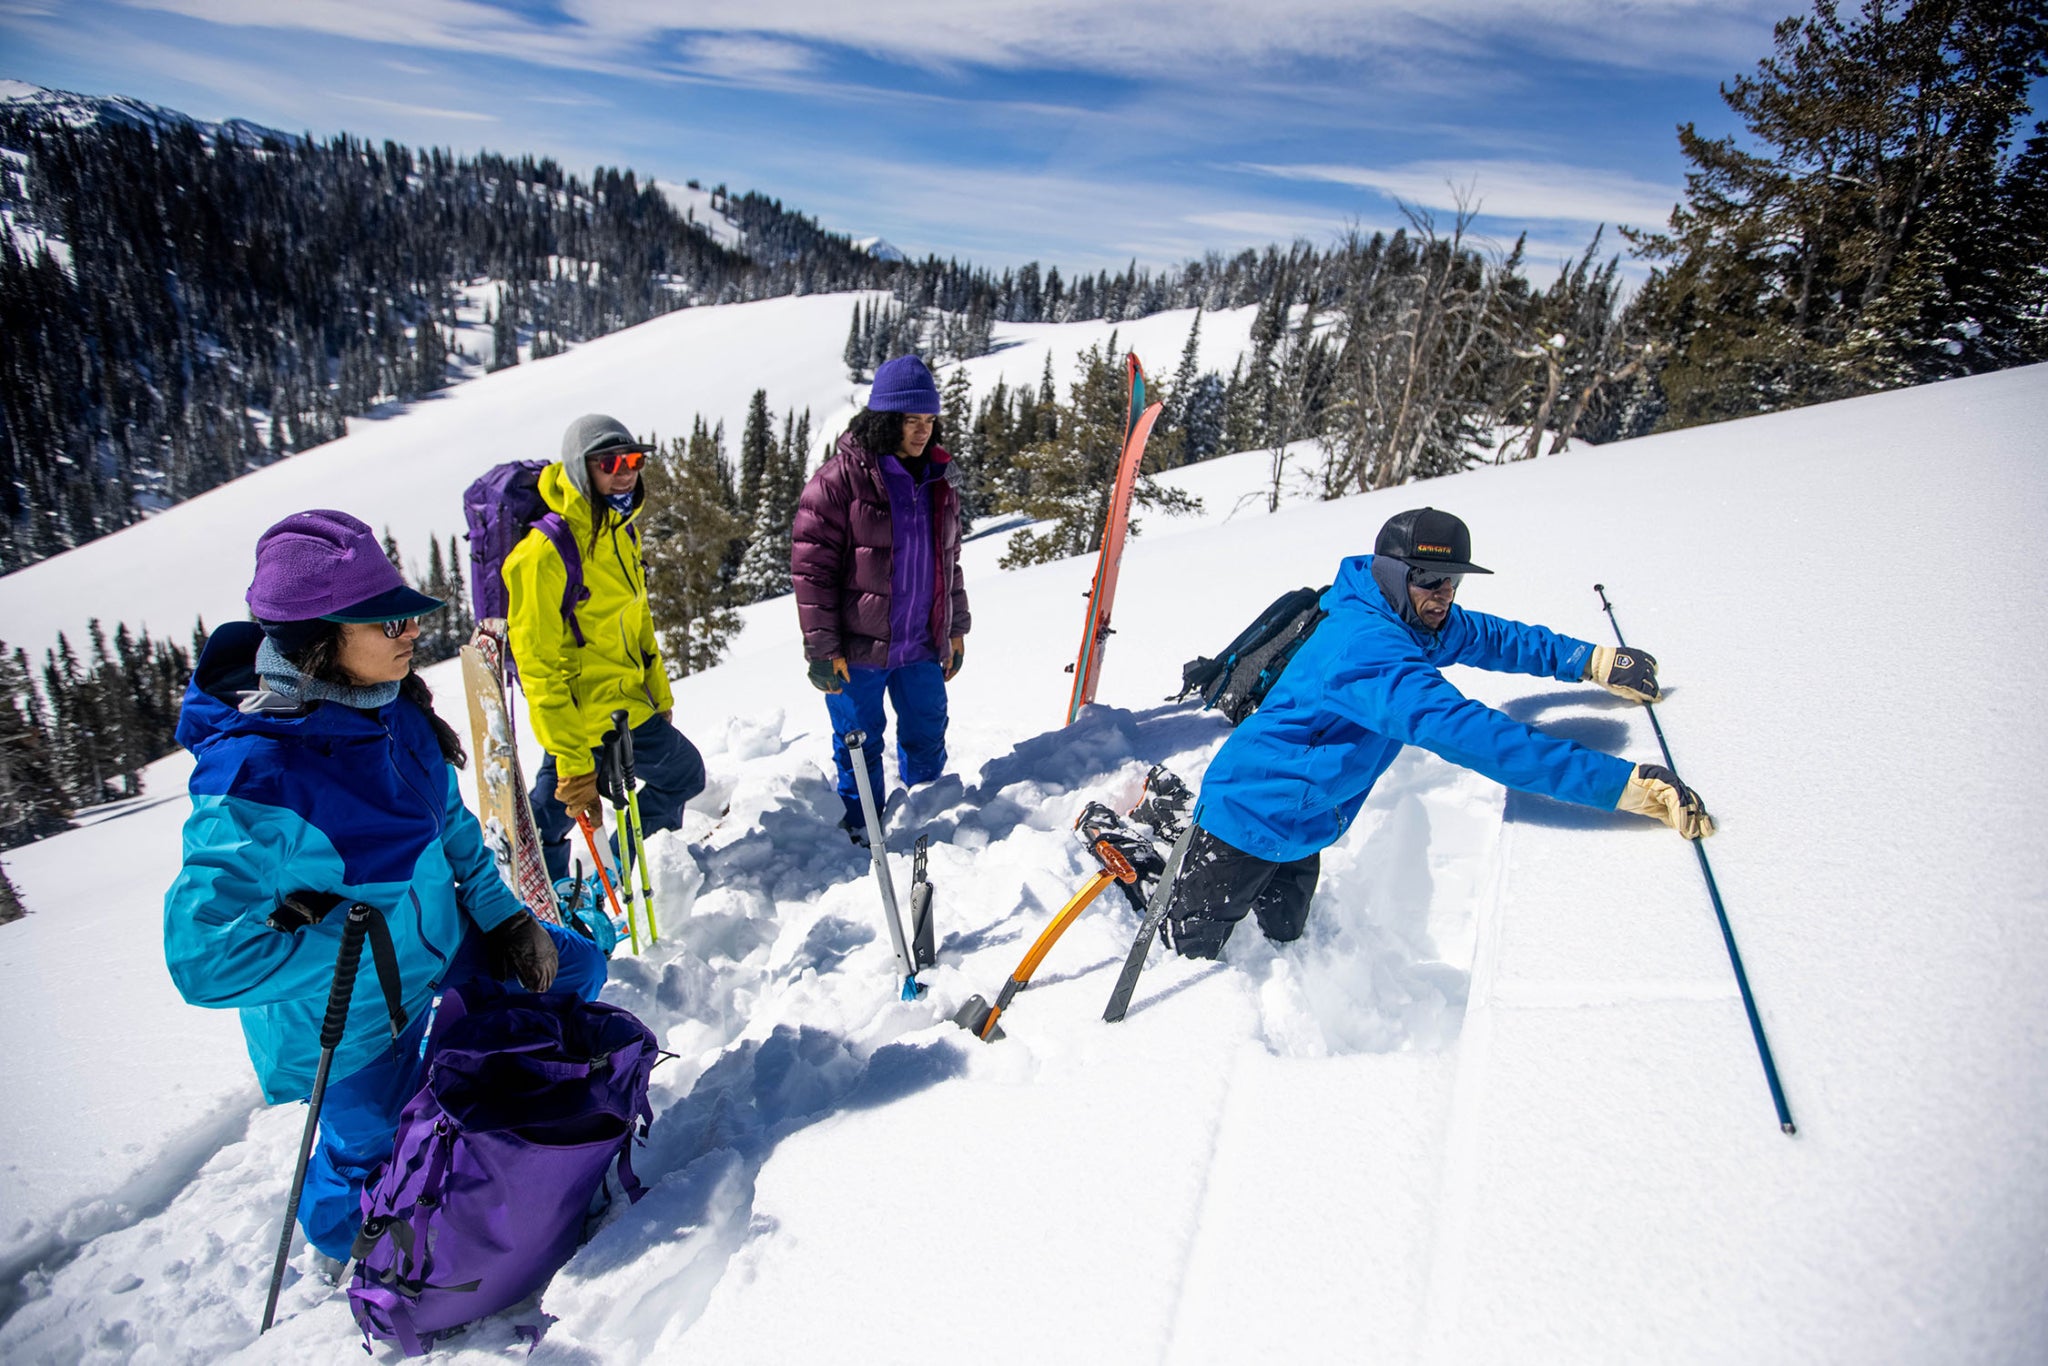 Sheena Dhamsania, Dani Reyes-Acosta and Zynobia (left to right) watch intently as Zahan Billimoria digs to expose a deep, persistent weak layer during a three-day backcountry snow safety course. Teton Range, Wyoming.